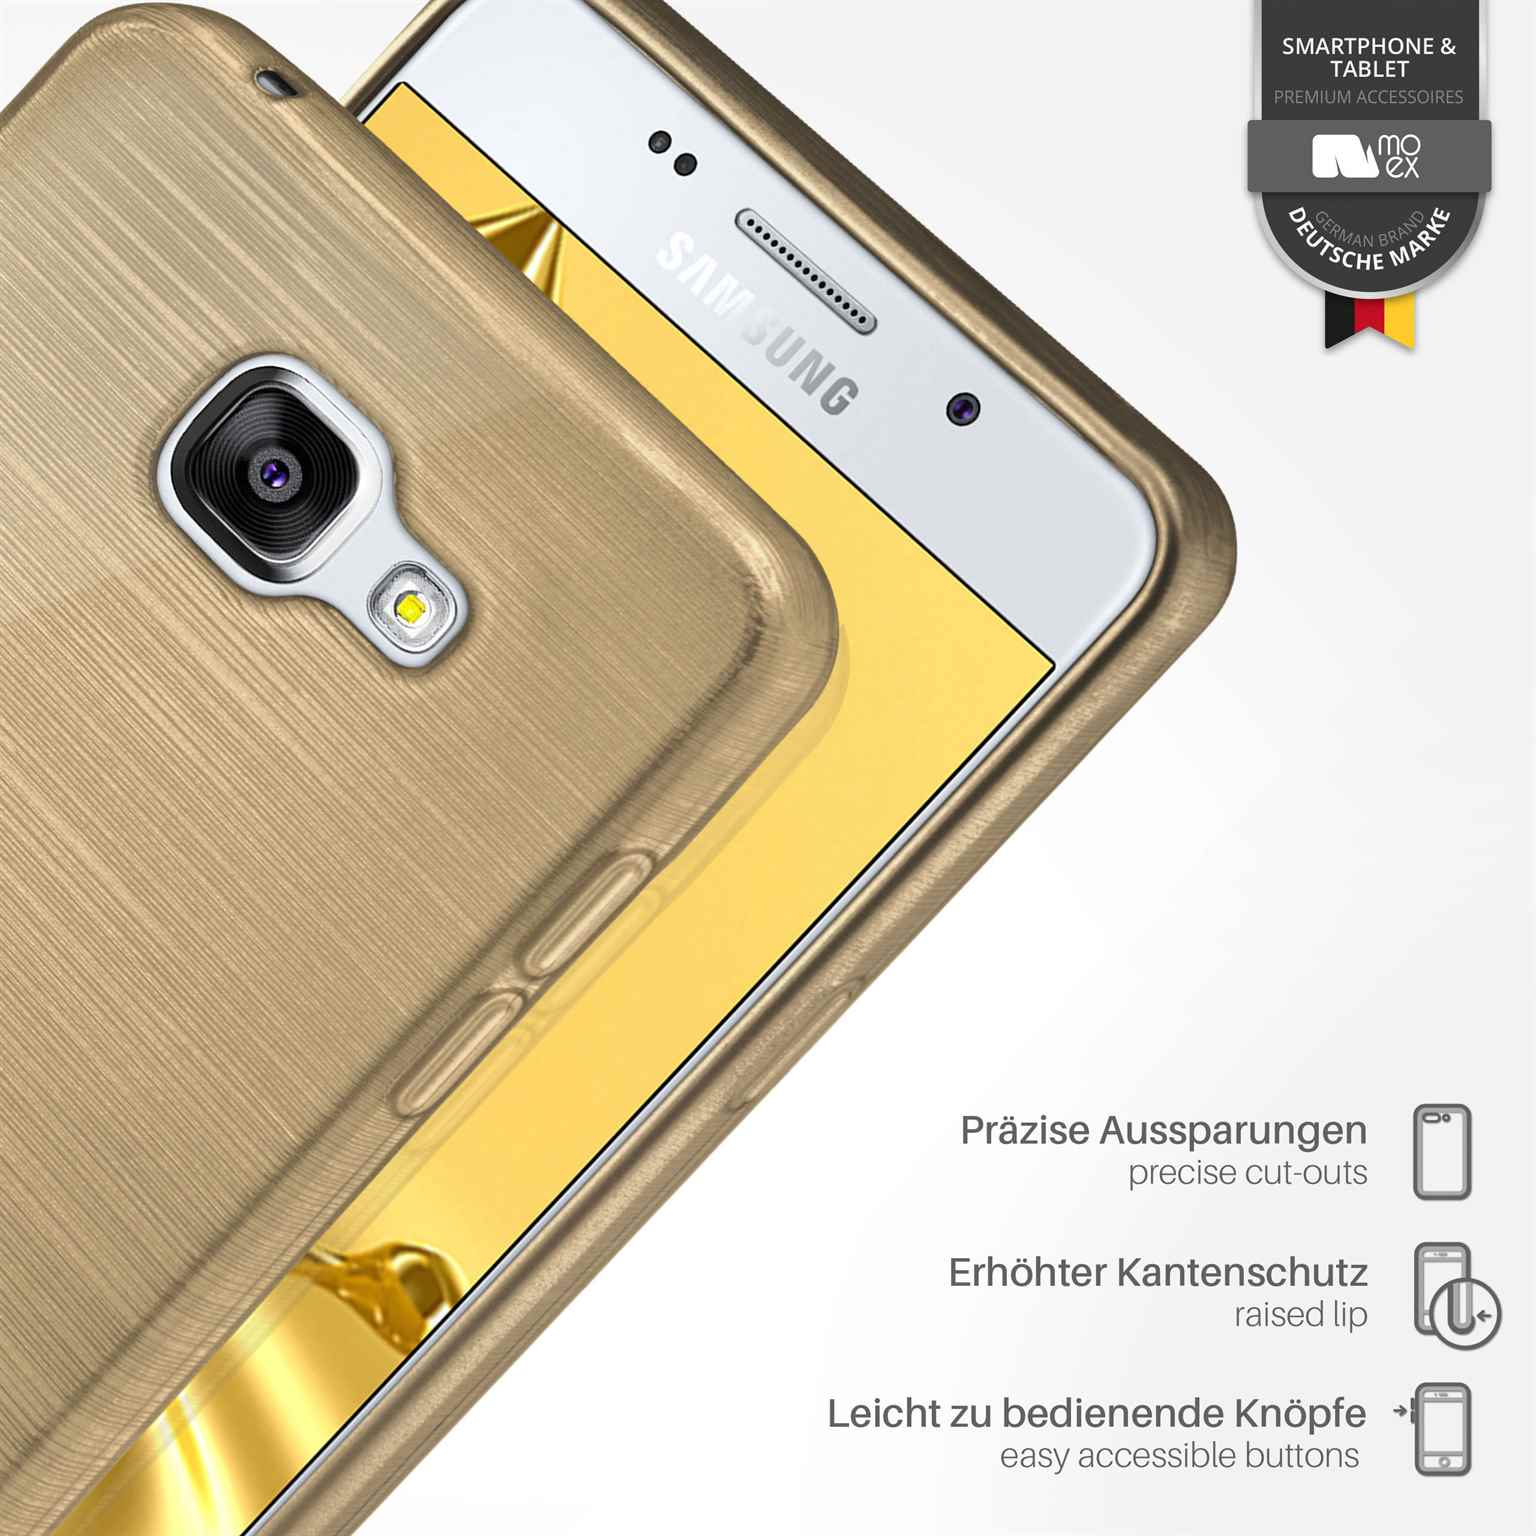 Samsung, A5 Brushed Ivory-Gold Backcover, (2016), Galaxy Case, MOEX